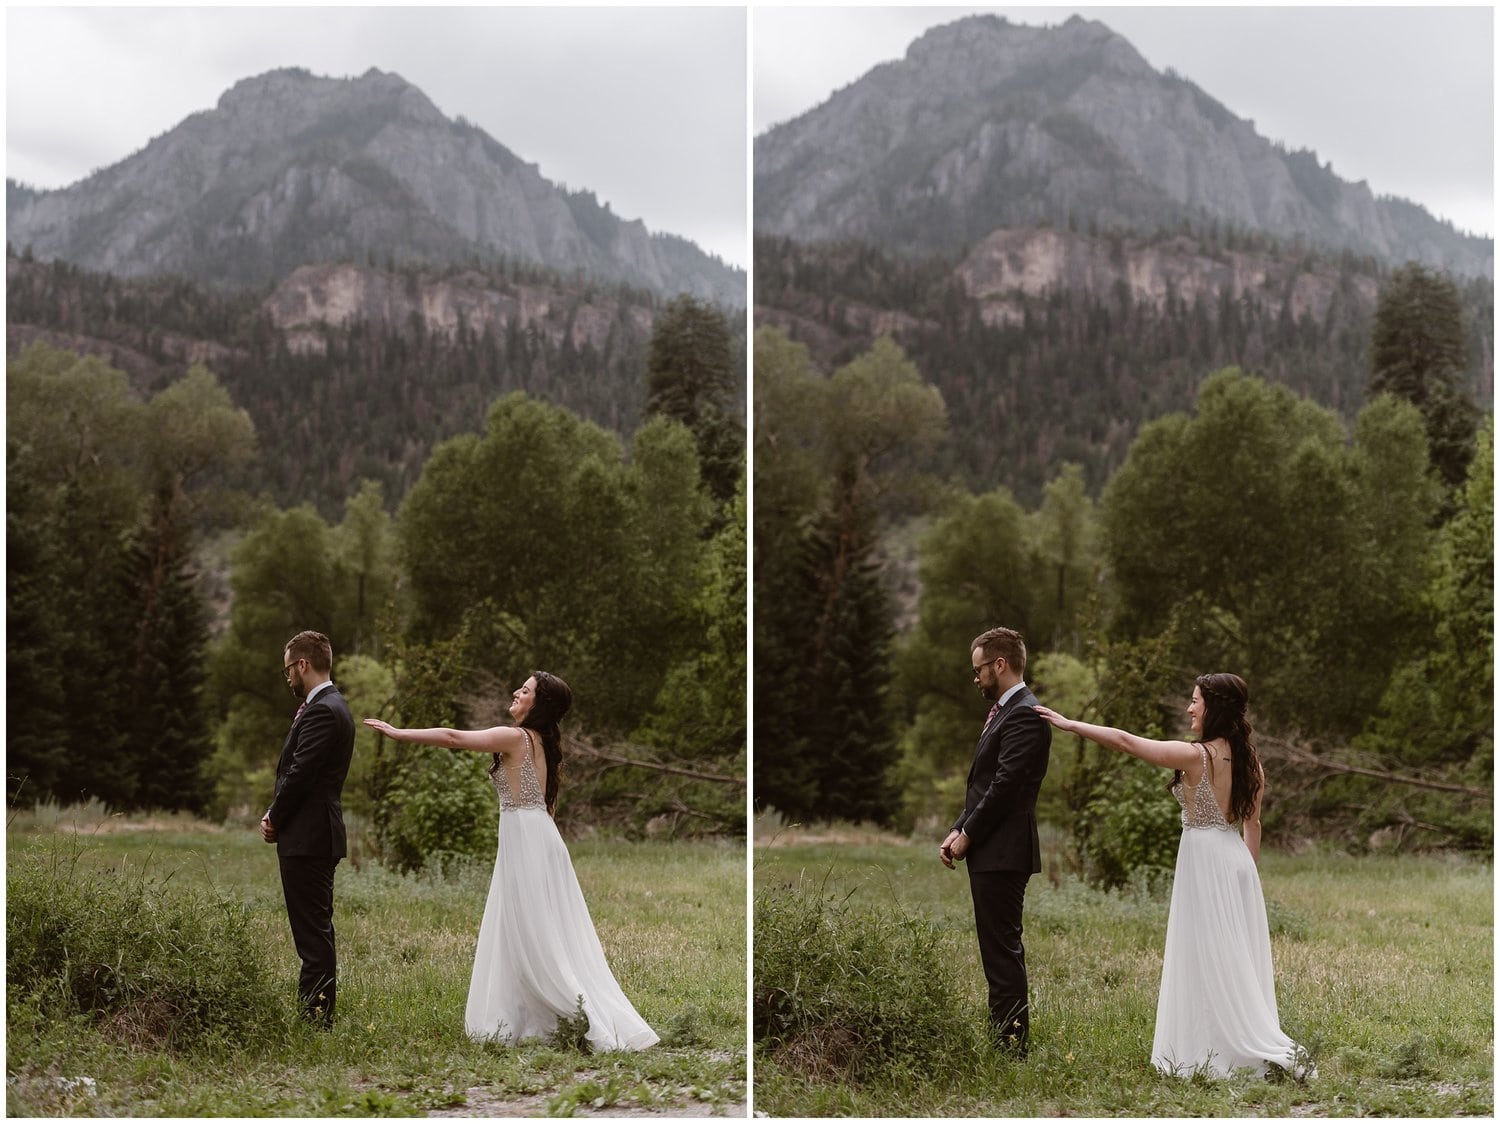 Bride taps groom on shoulder for first look, with mountains in background. 